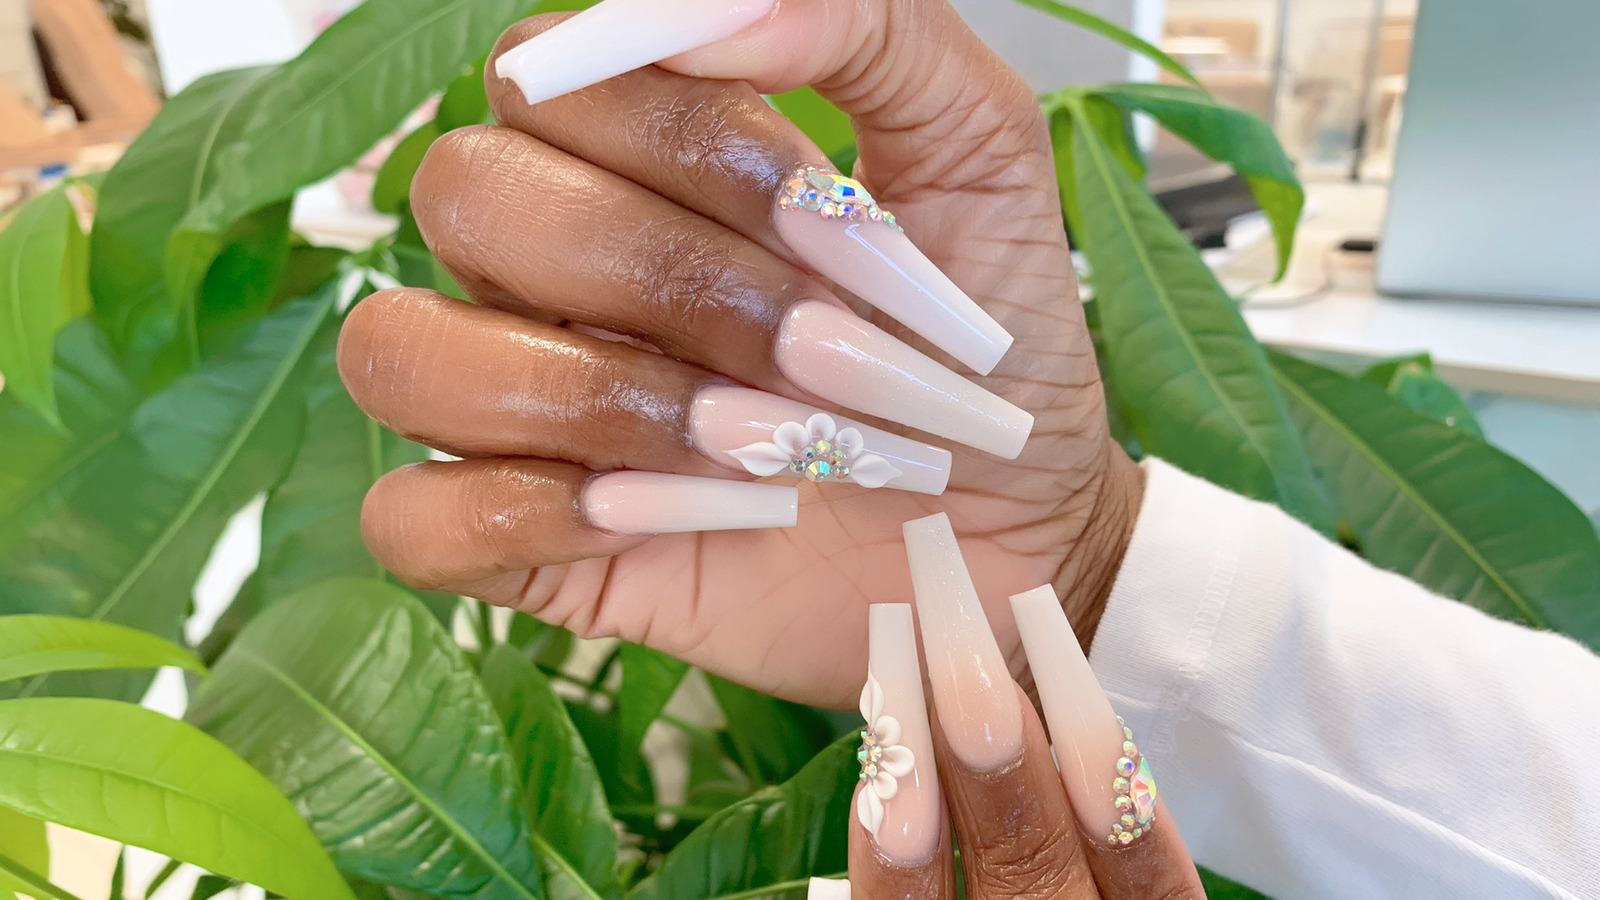 6. White coffin nails with rhinestone accents and glitter - wide 5